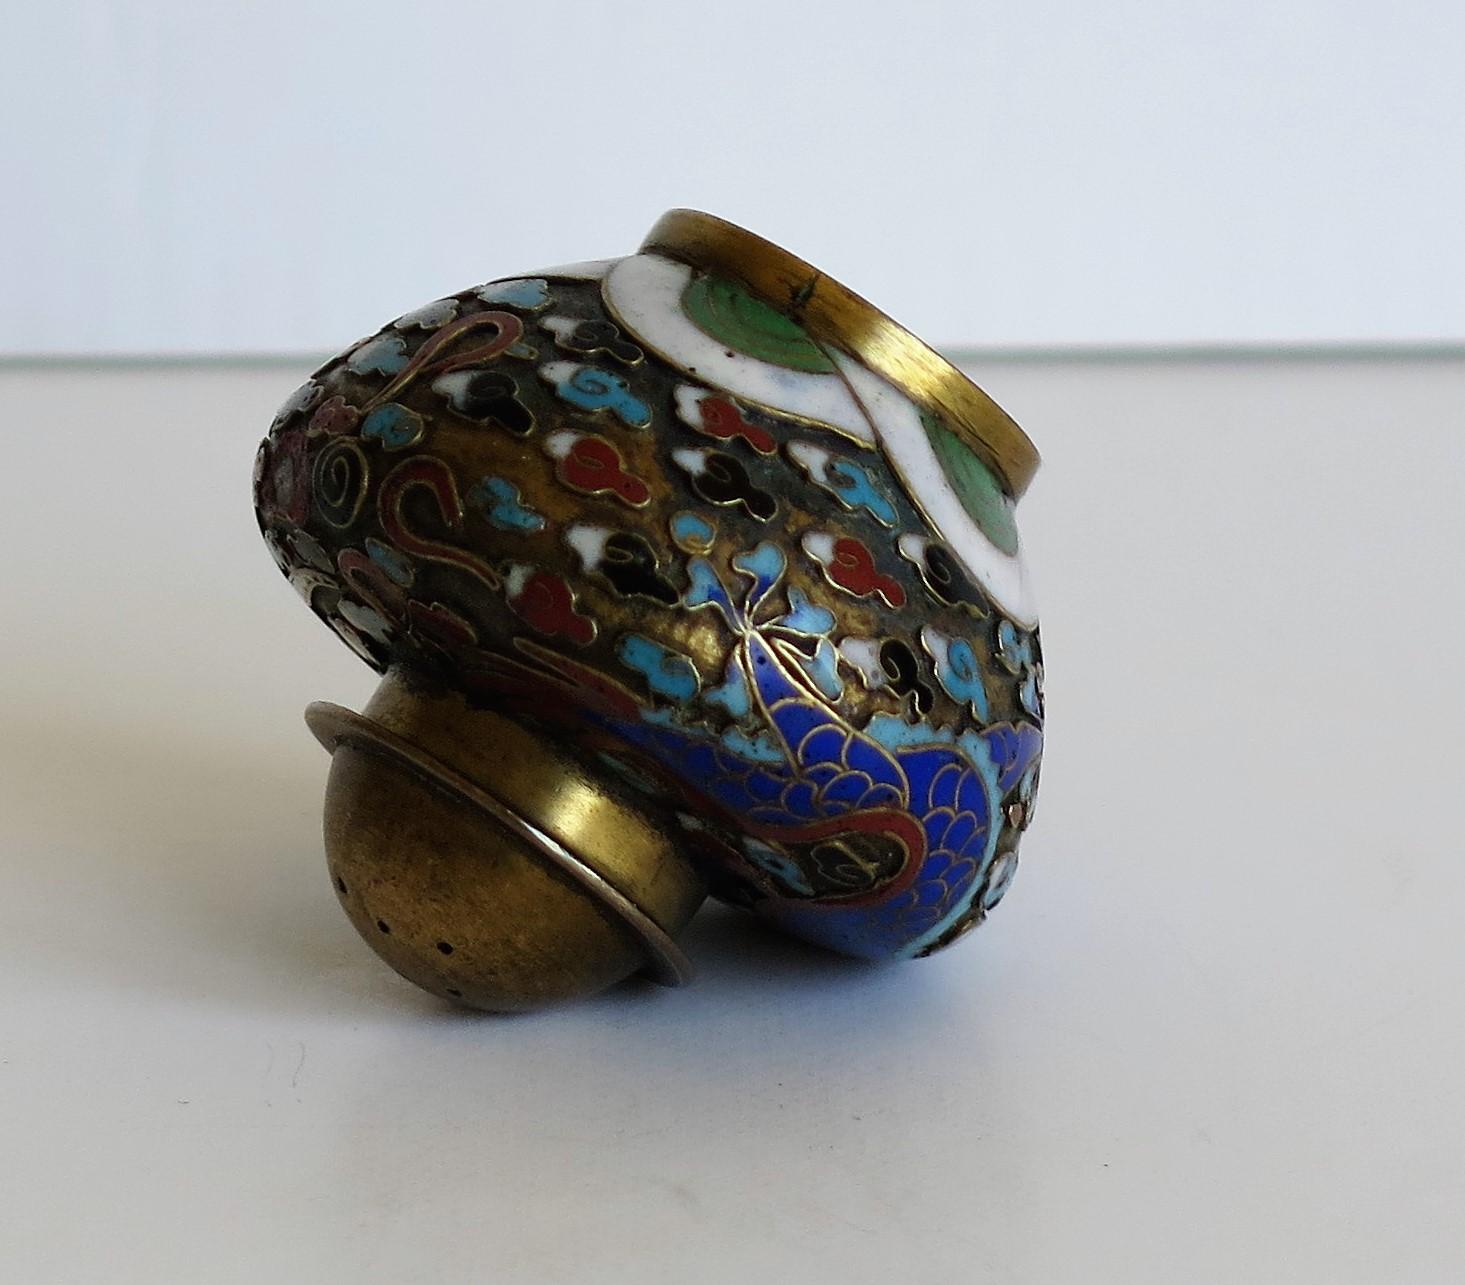 19th Century Chinese Cloisonné Pepper Pot with Dragon Decoration, Qing Dynasty 6